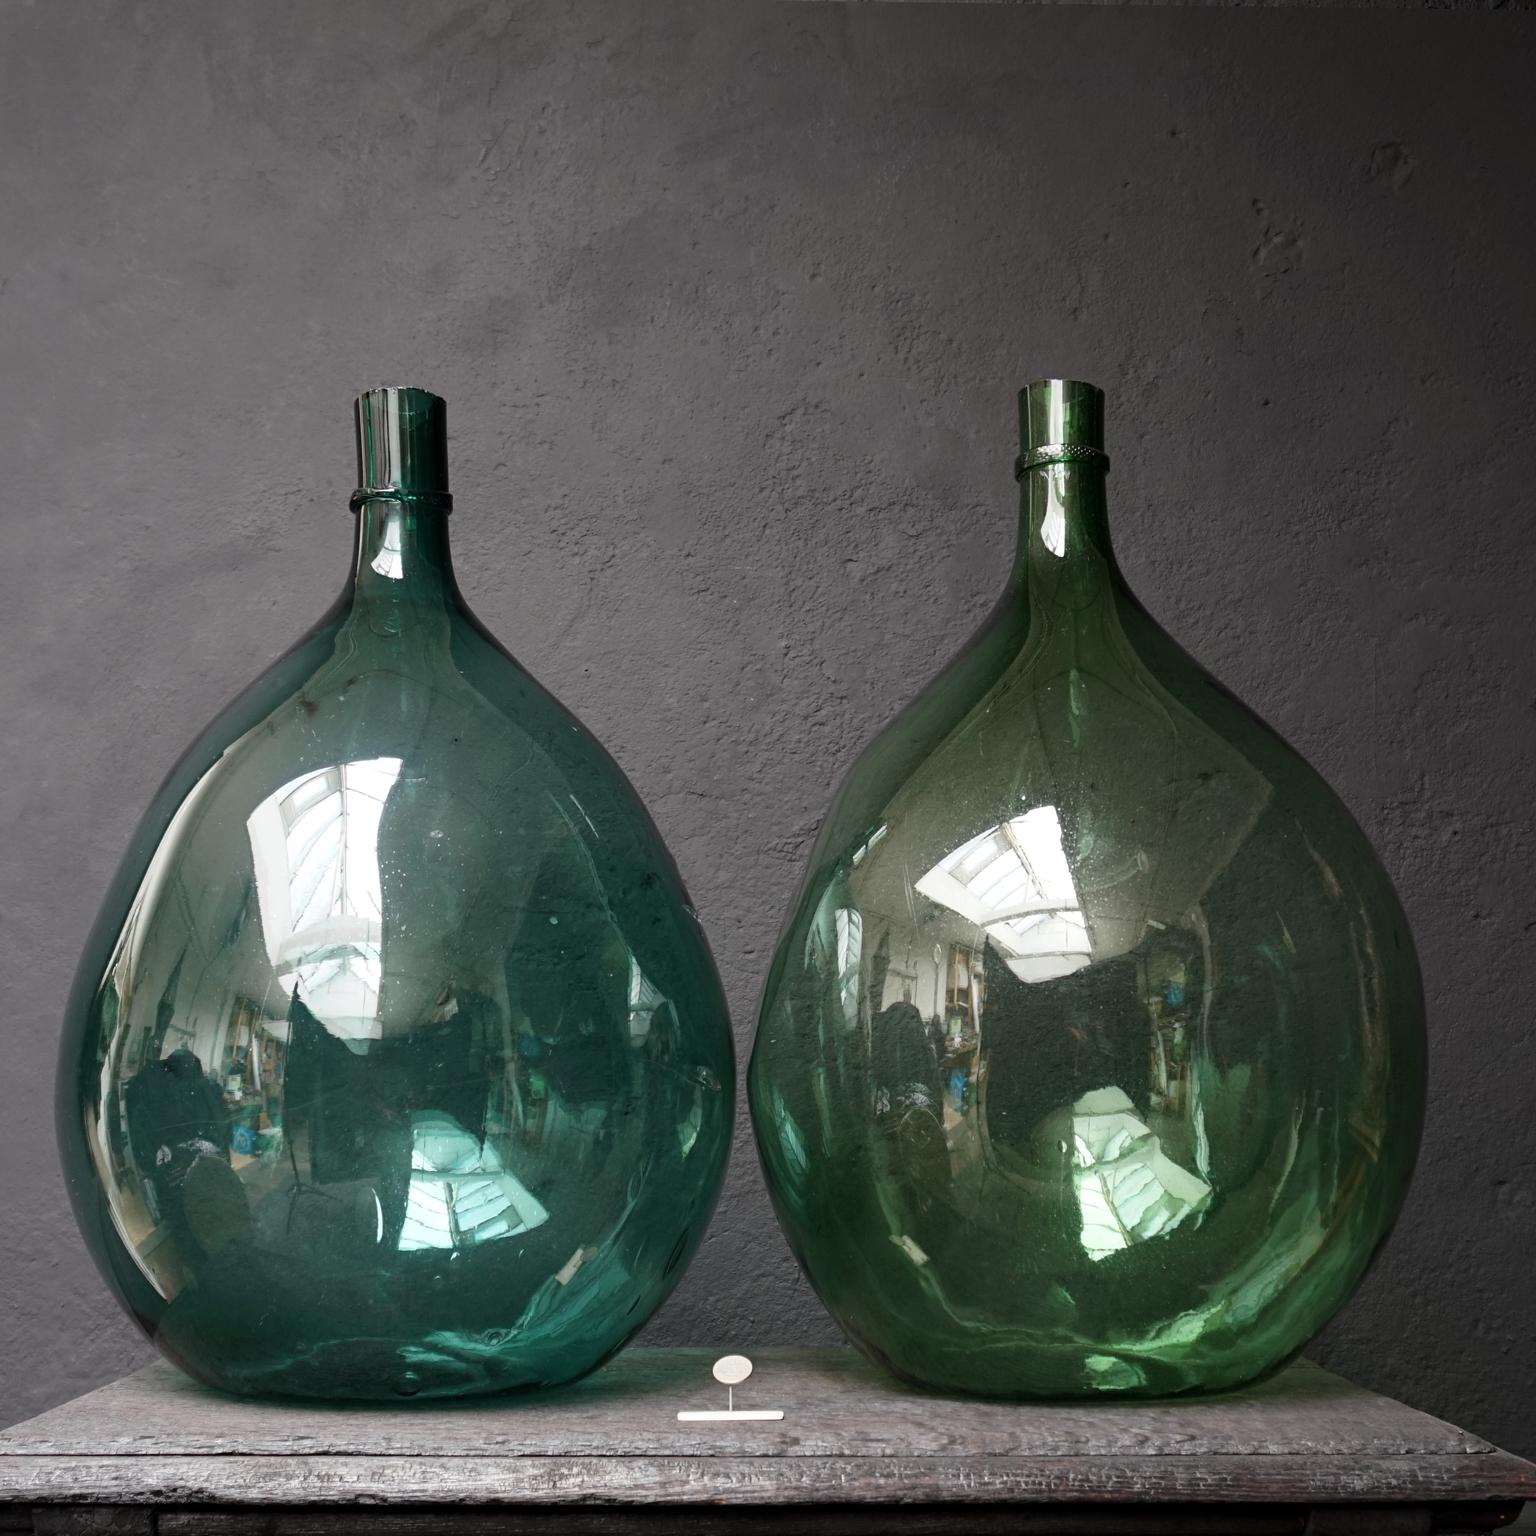 Hand blown in a globular or large ballon form with hand added bottlenecks and cut rim
Wonderful shade of blue-ish green, hand blown wine bottle, also known as Dame Jeanne, Demijohn, Carboy or Bonbonne bottle with a very nice 'dent' in the